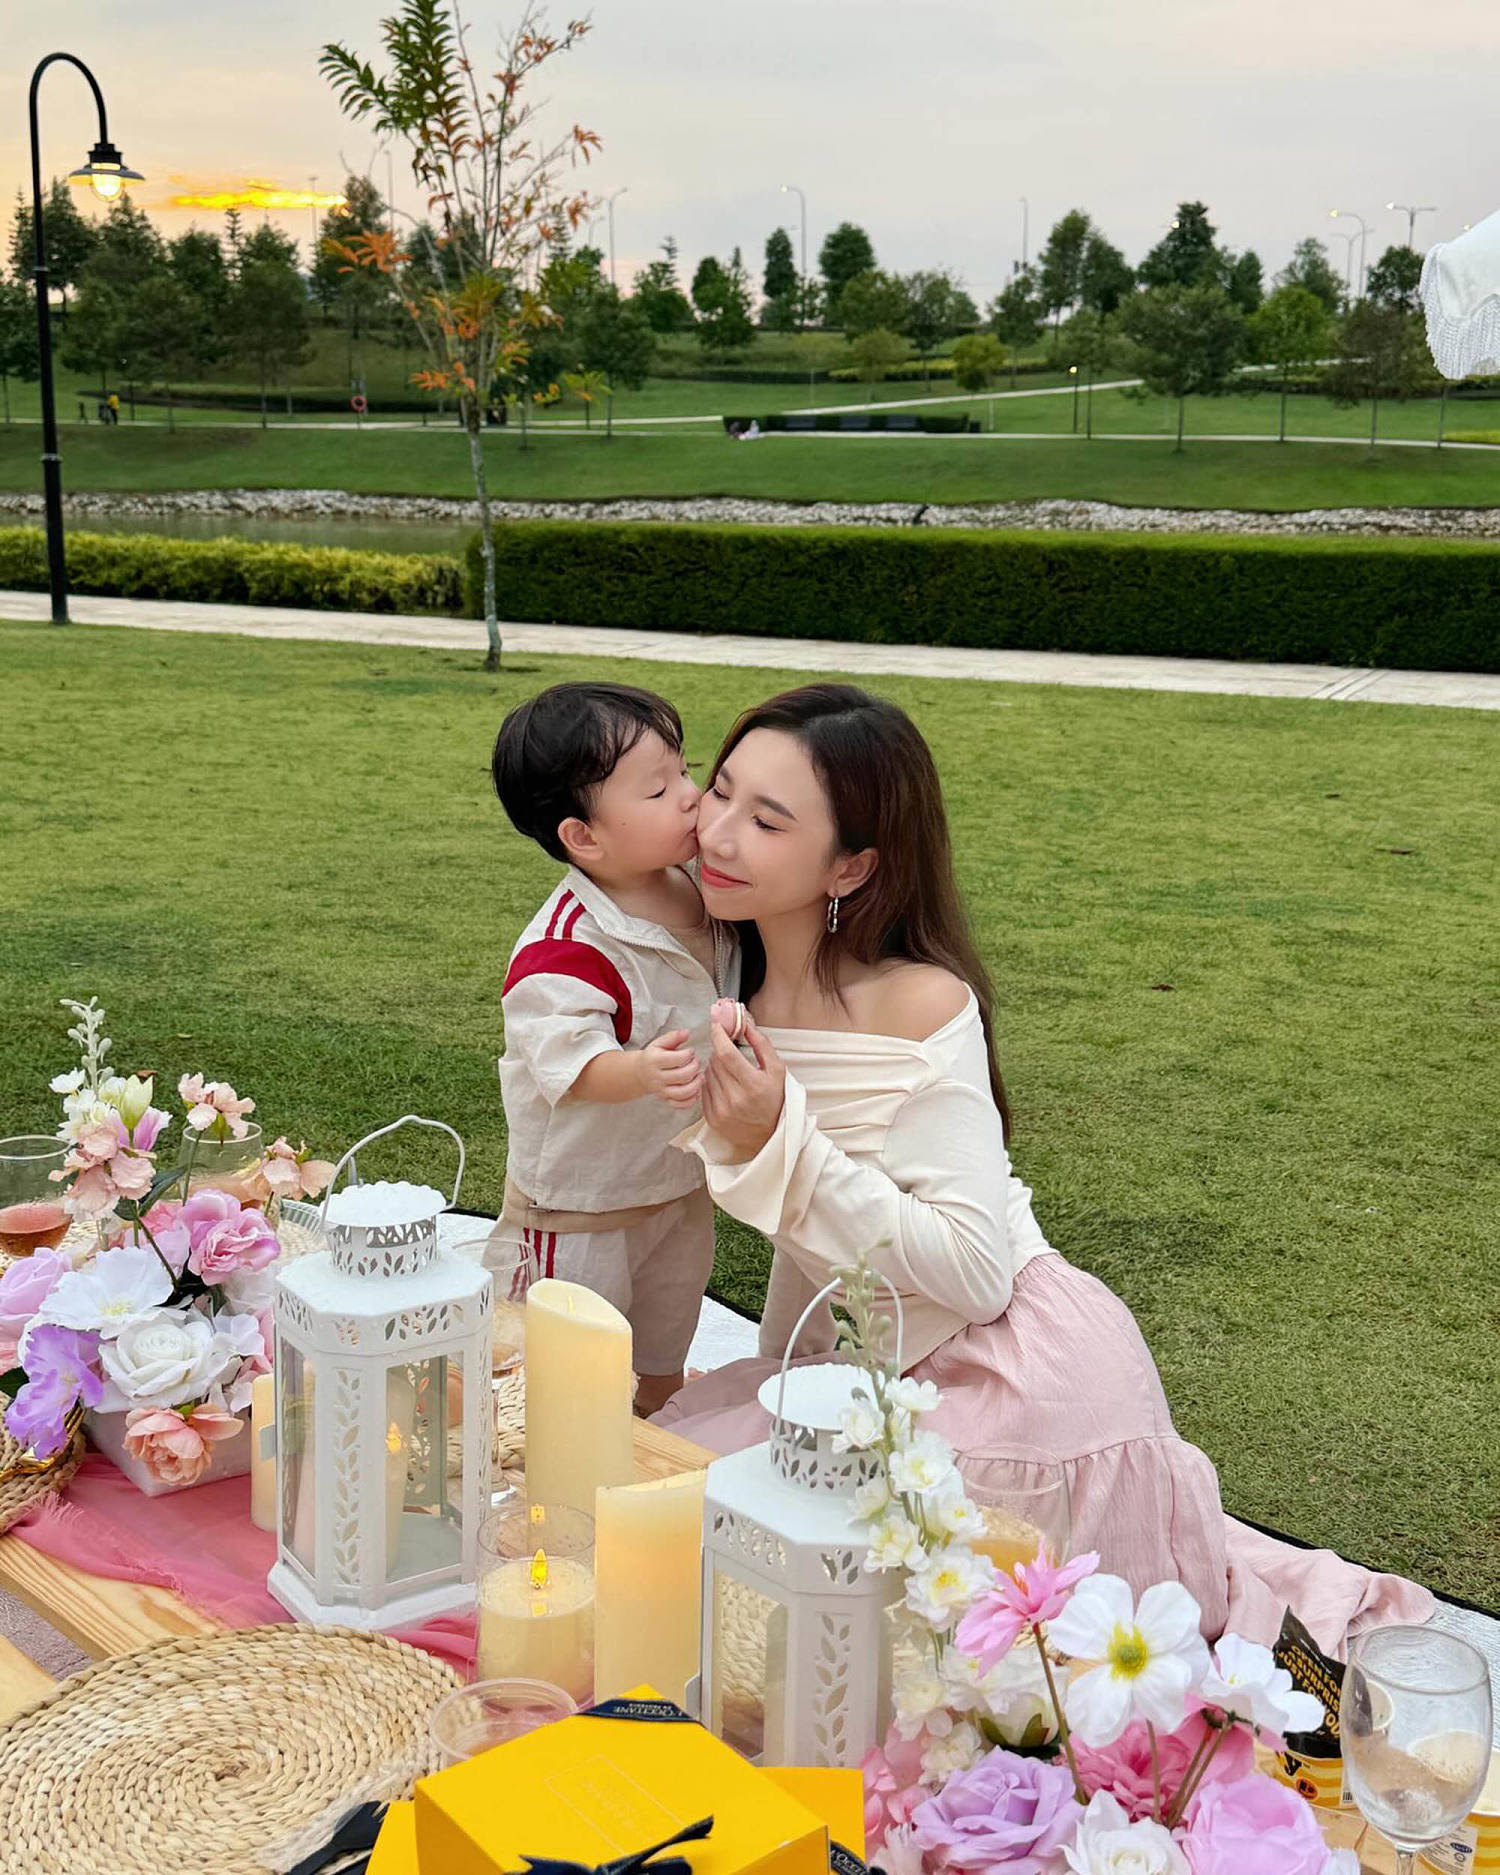 Influencer Jasmine Yong says her 2-year-old son drowned while she and her husband were napping